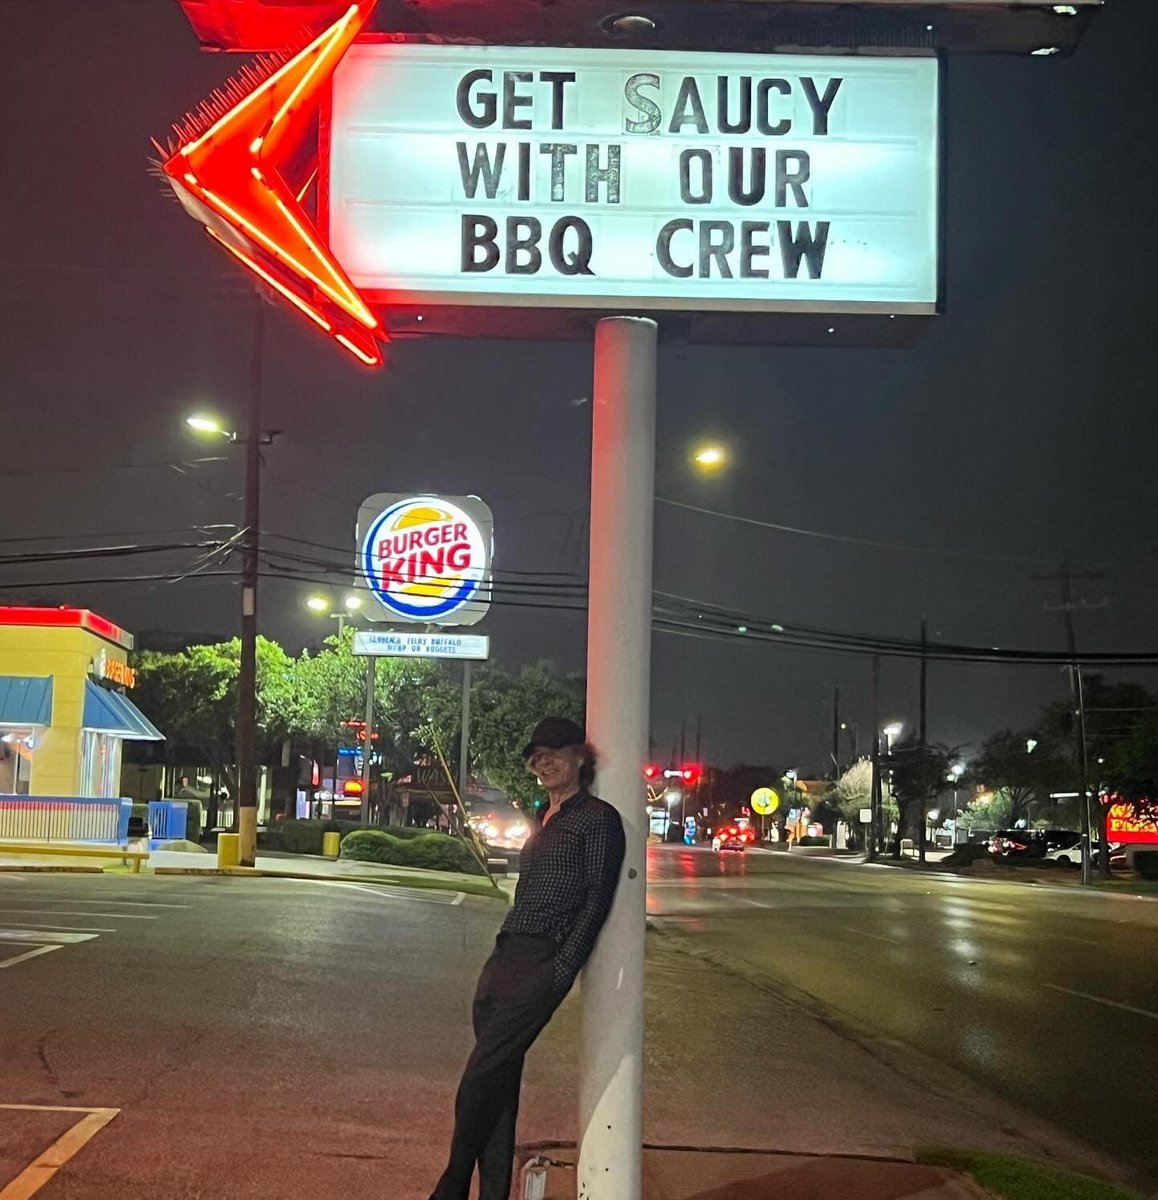 obsessed with the mental image of mick being like “pull over I wanna take a pic wih the burger king sign”